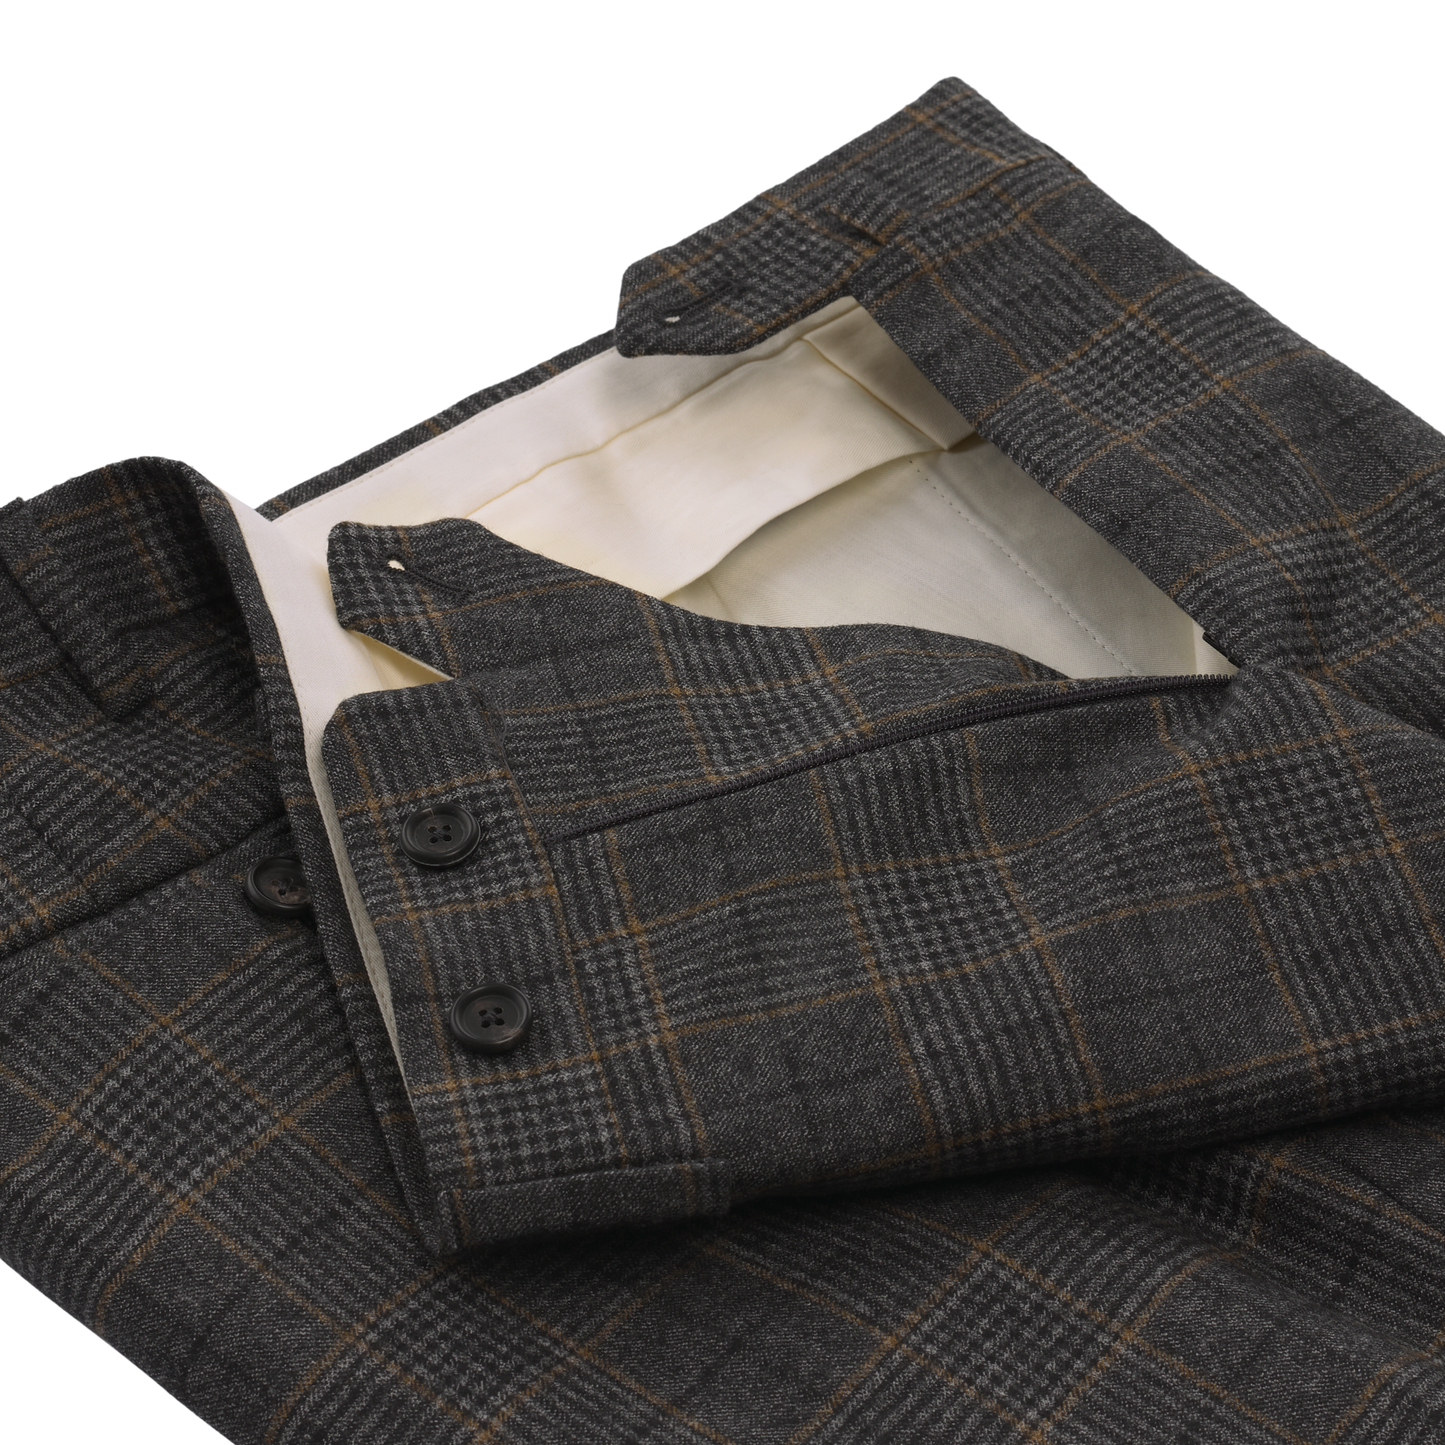 De Petrillo Single-Breasted Glencheck Wool Suit in Grey. Exclusively Made for Sartale - SARTALE